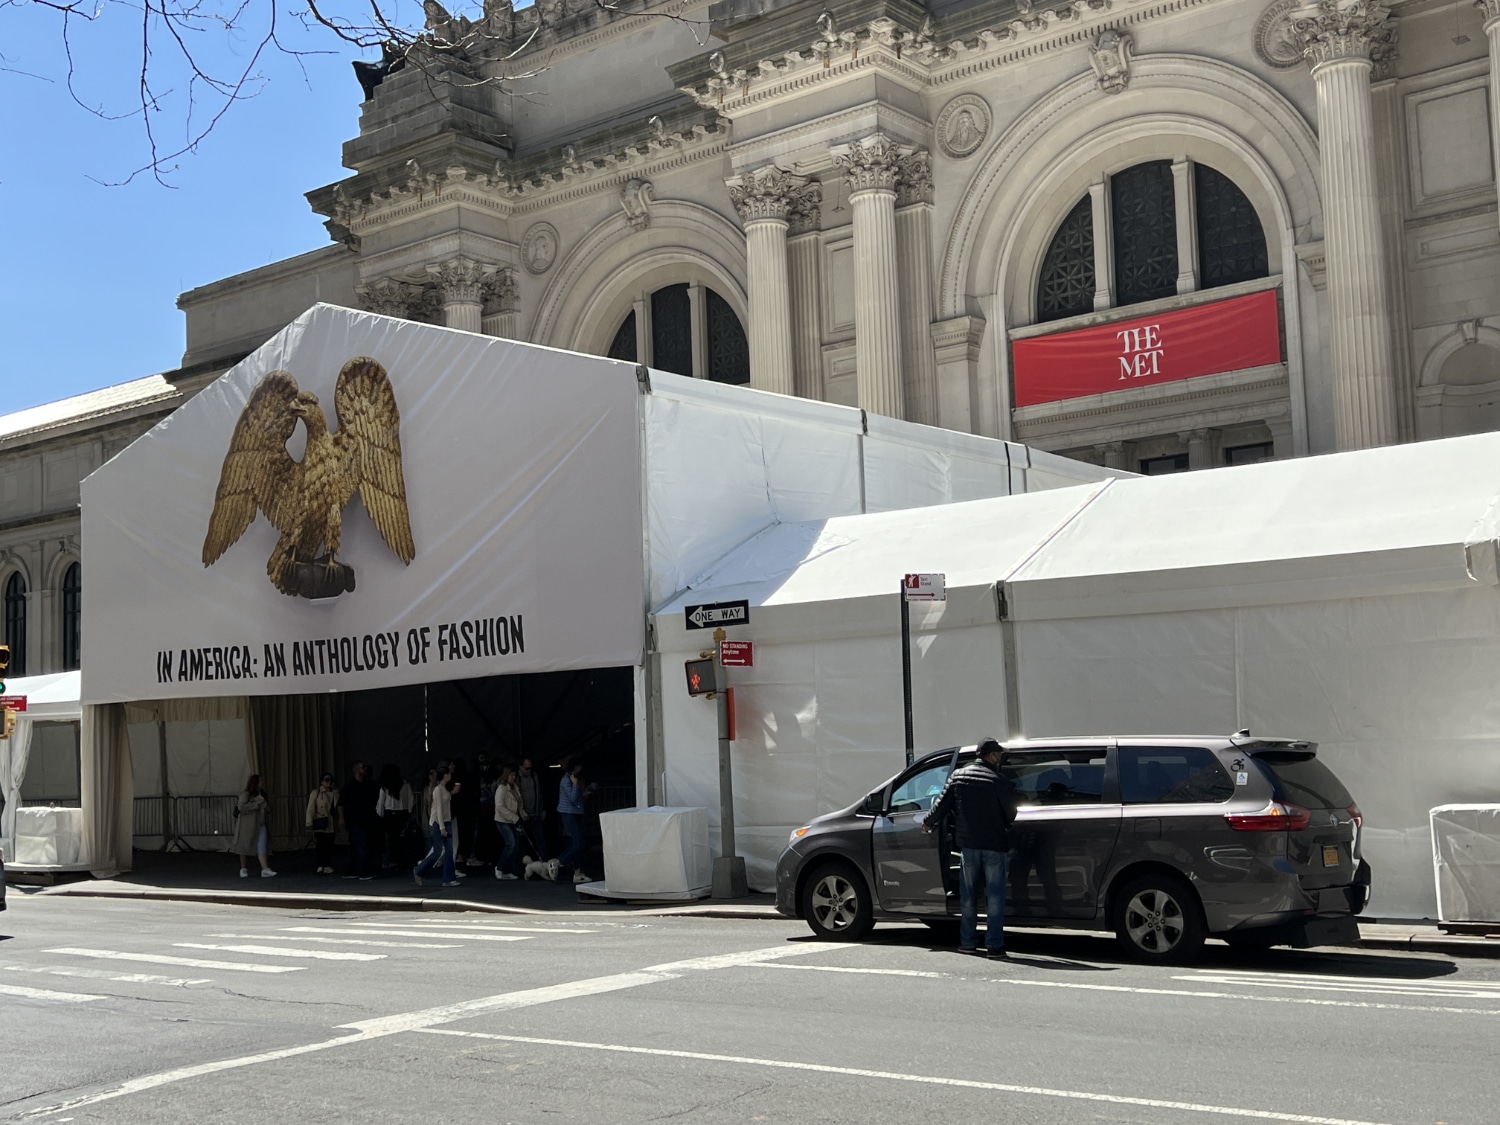 Fifth Avenue transforms ahead of Monday's star-studded Met Gala/Upper East Site